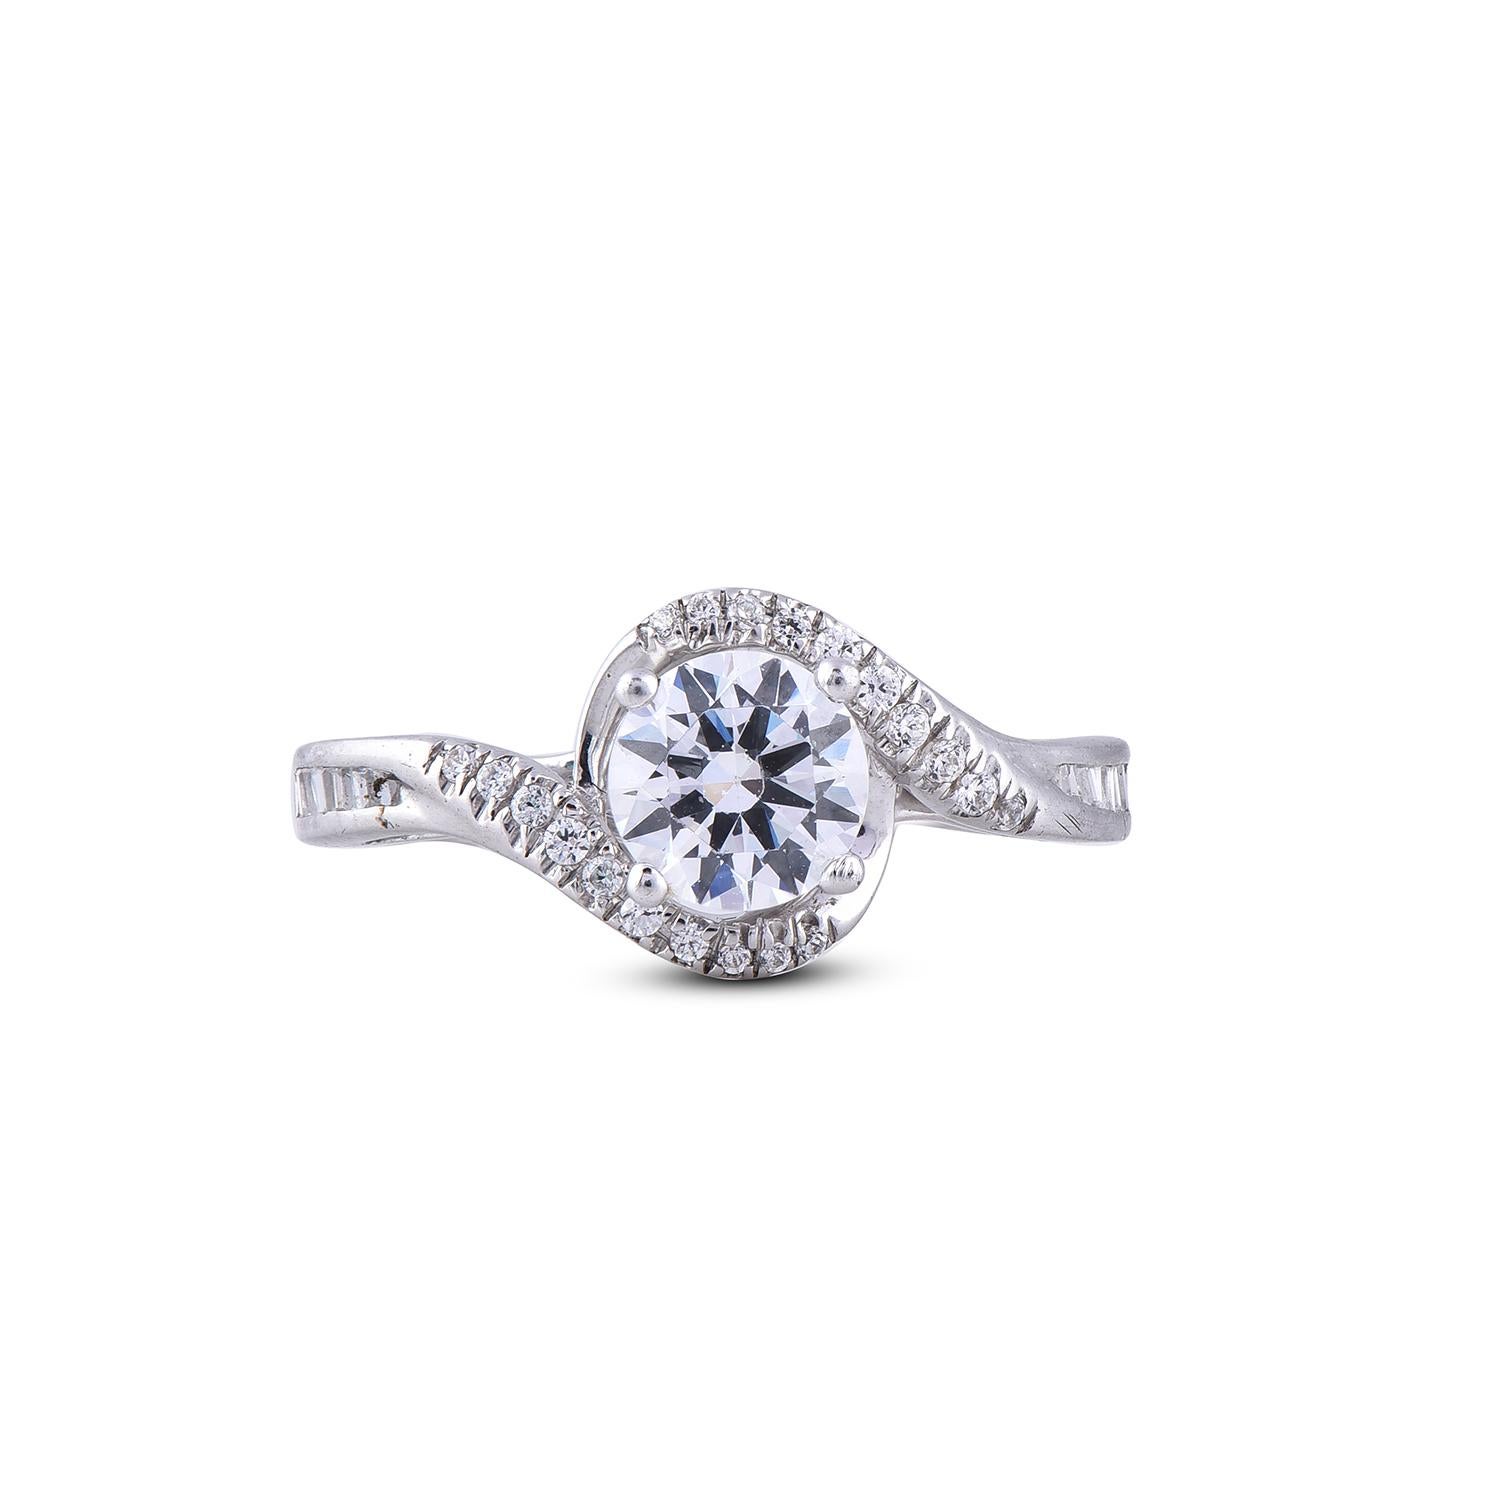 Truly exquisite, this entangled design 14KT white gold diamond engagement band ring is sure to be admired for the inherent classic beauty and elegance within its design. These diamond ring are studded with 37 single cut, brilliant cut round diamonds